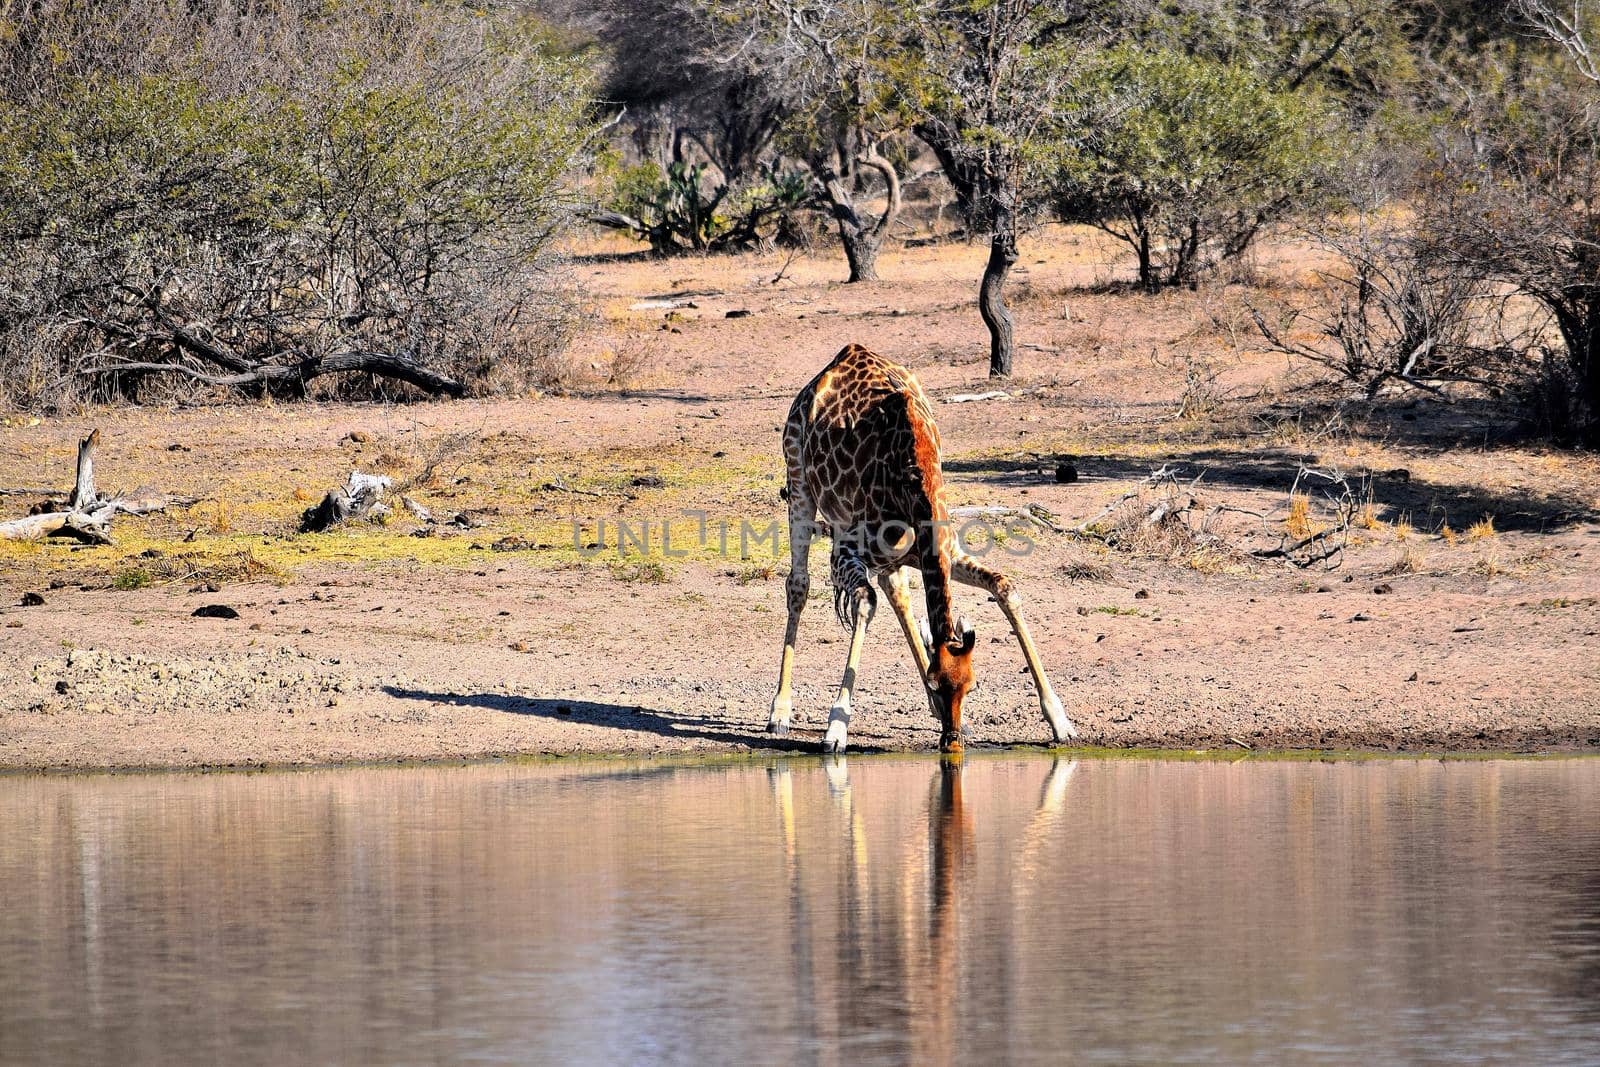 Giraffe drinking water in a puddle in the Kruger National Park, South Africa.